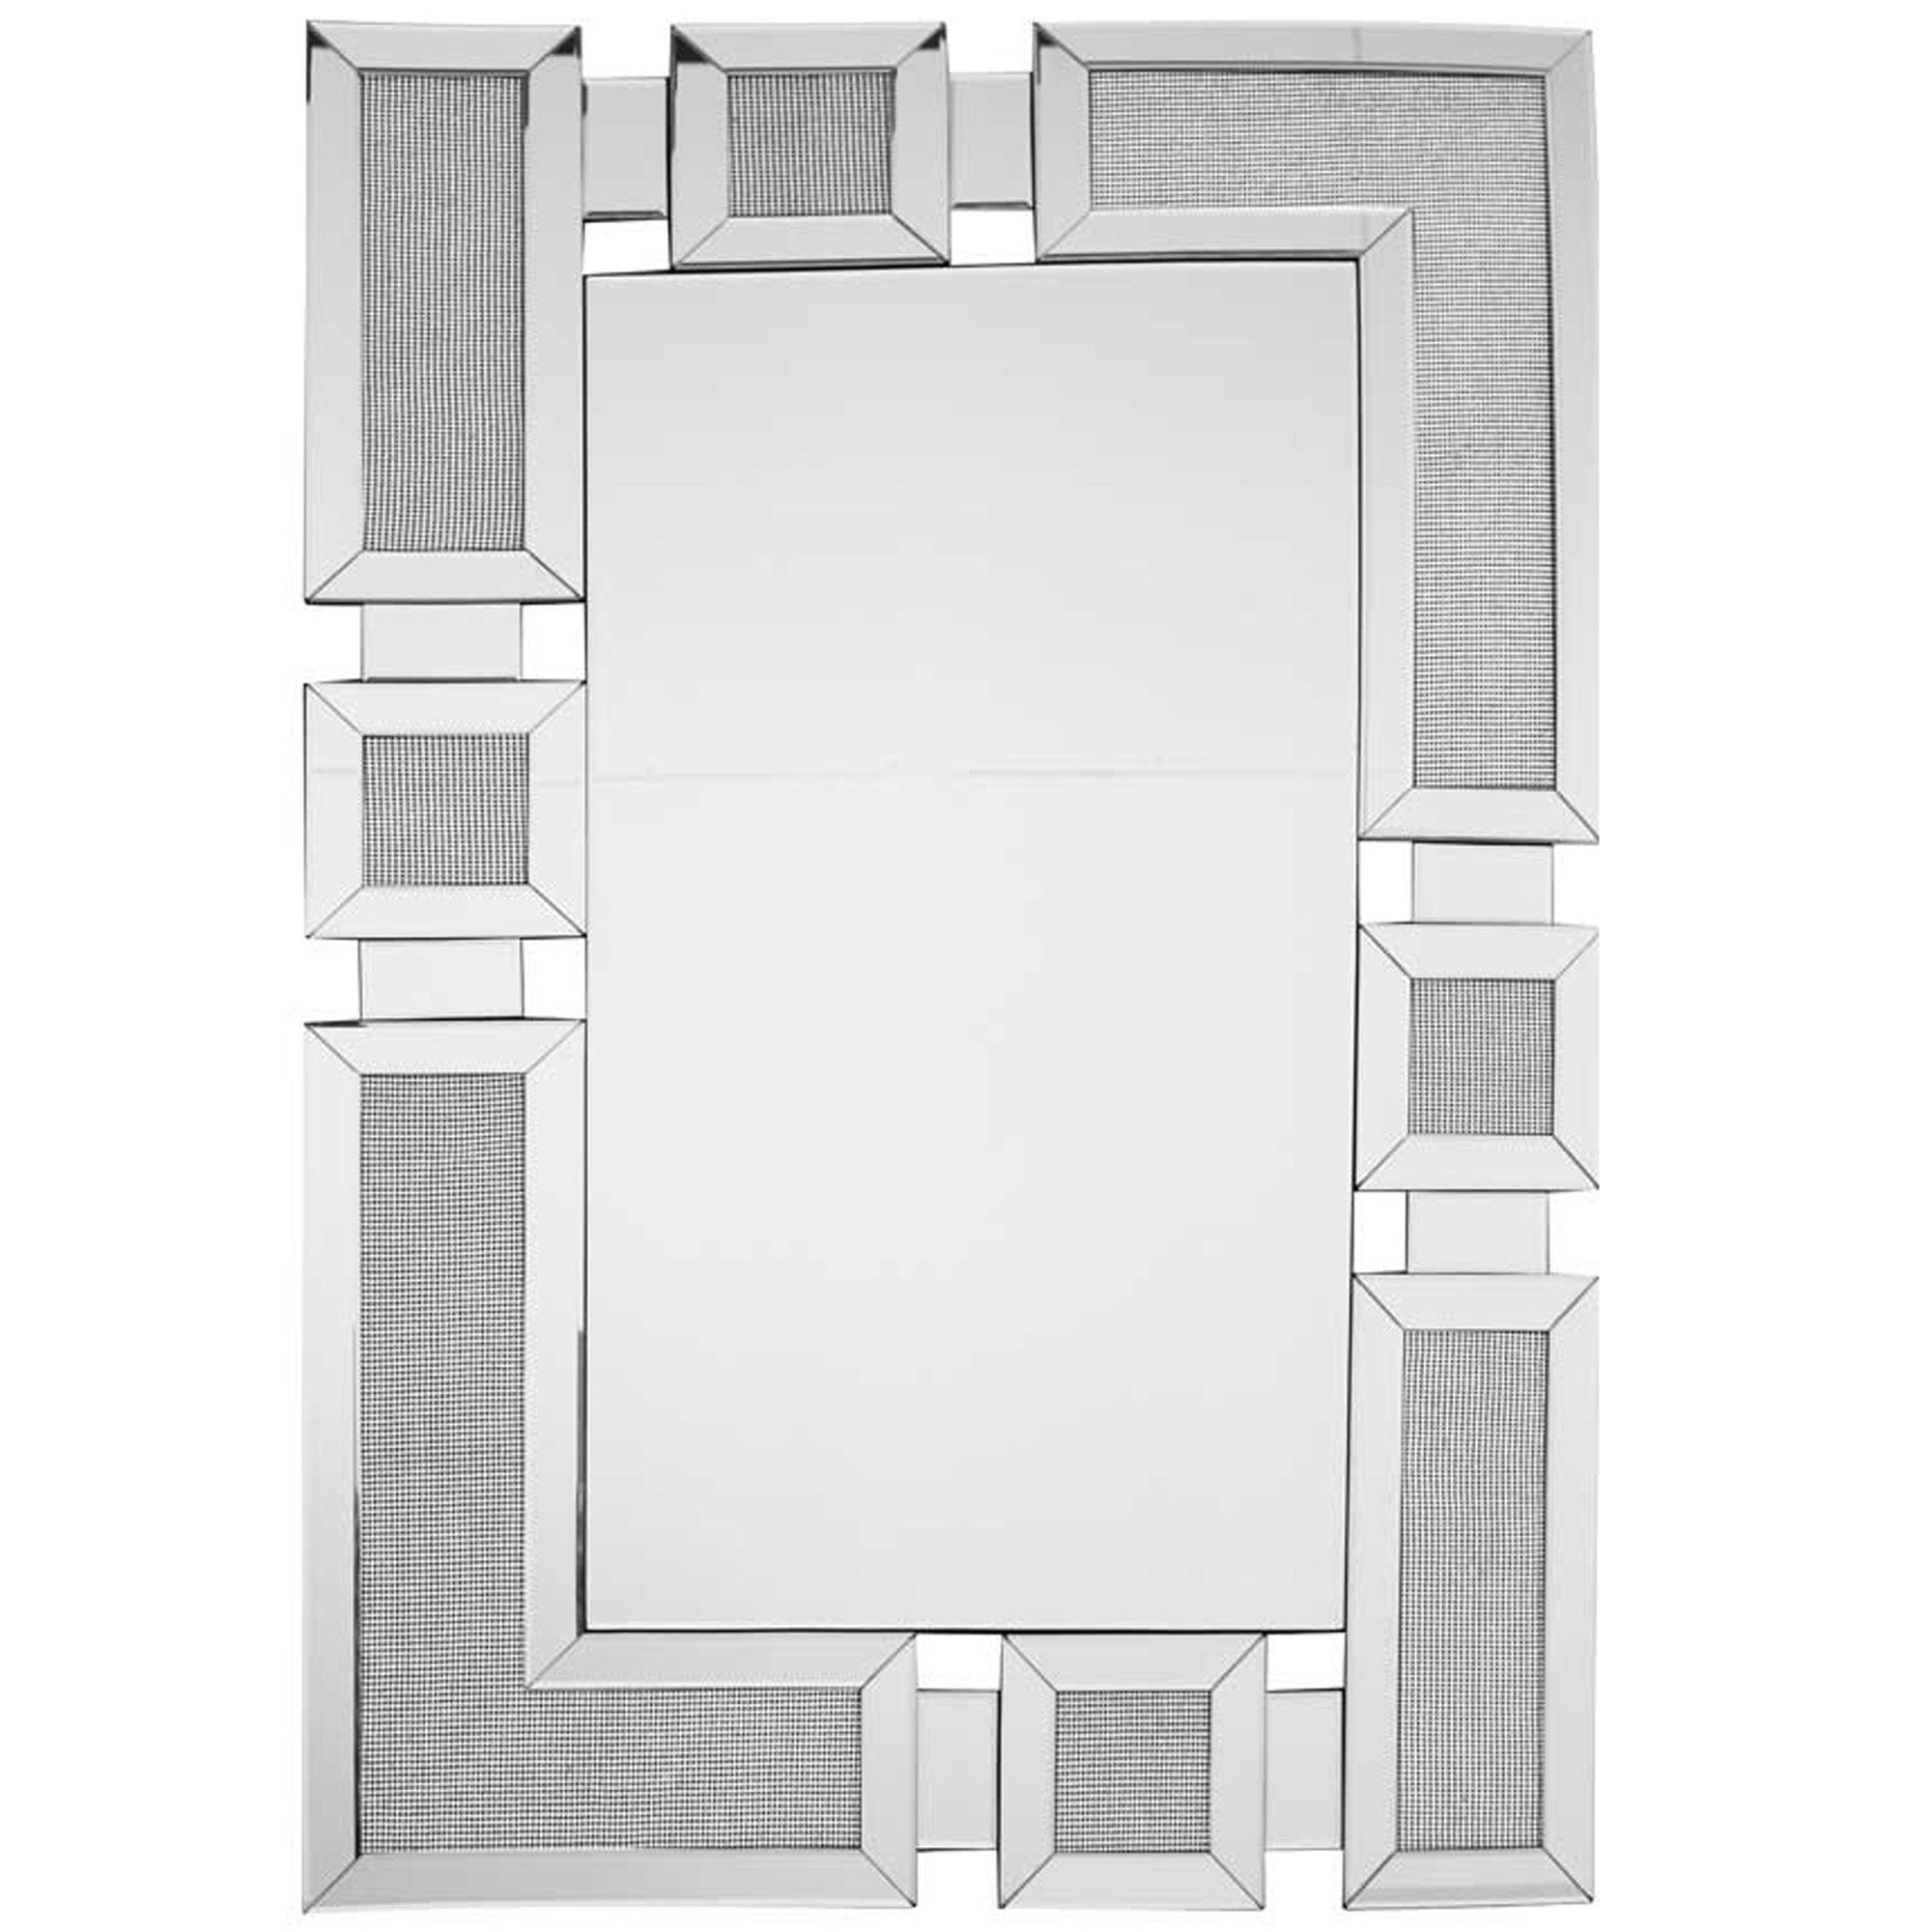 Glamour Decorative Silver Wall Mirror | Decorative Wall Mirrors Regarding Silver Decorative Wall Mirrors (View 14 of 15)